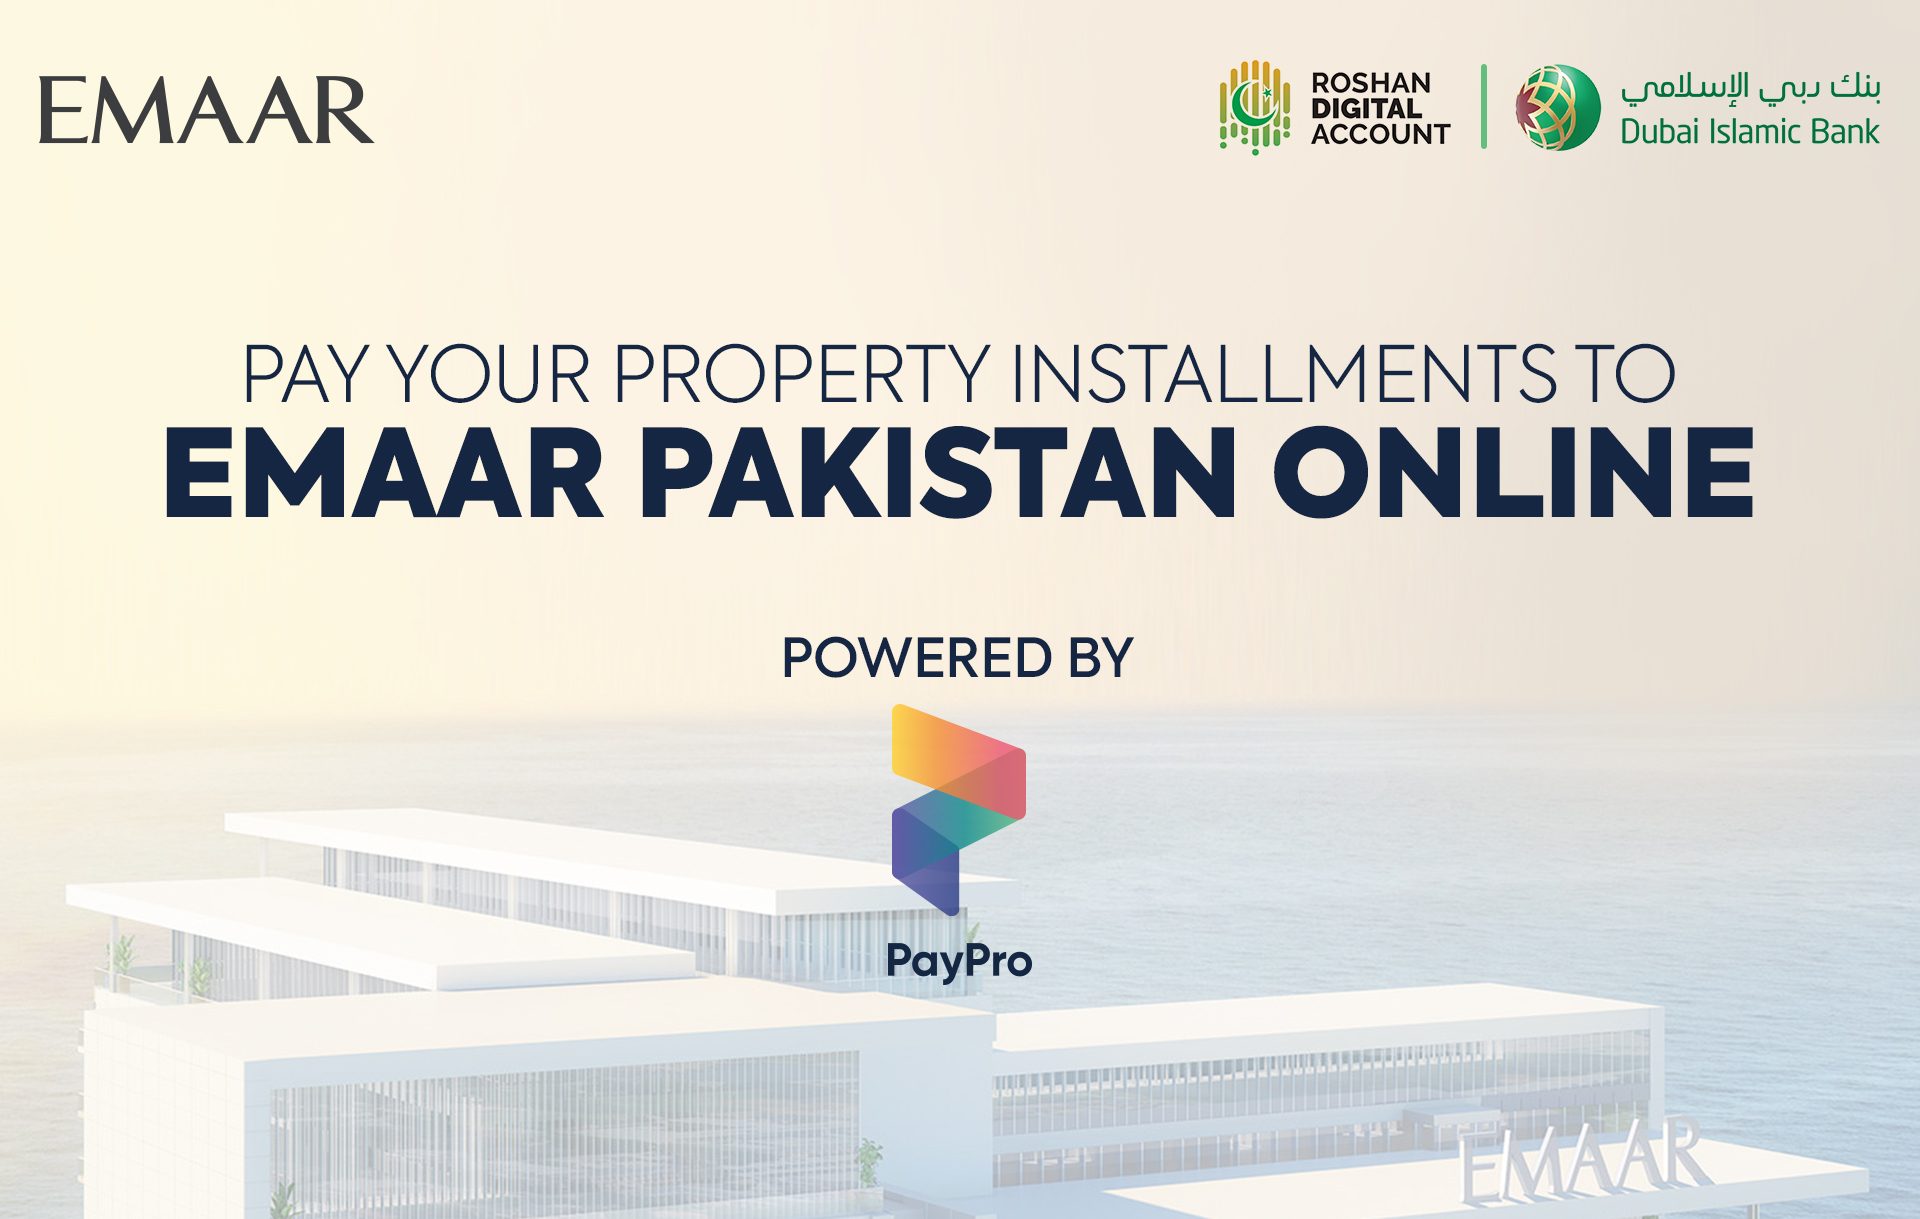 EMAAR Pakistan Collaborates with PayPro to enable Overseas Payments through Dubai Islamic Bank’s Roshan Digital Account